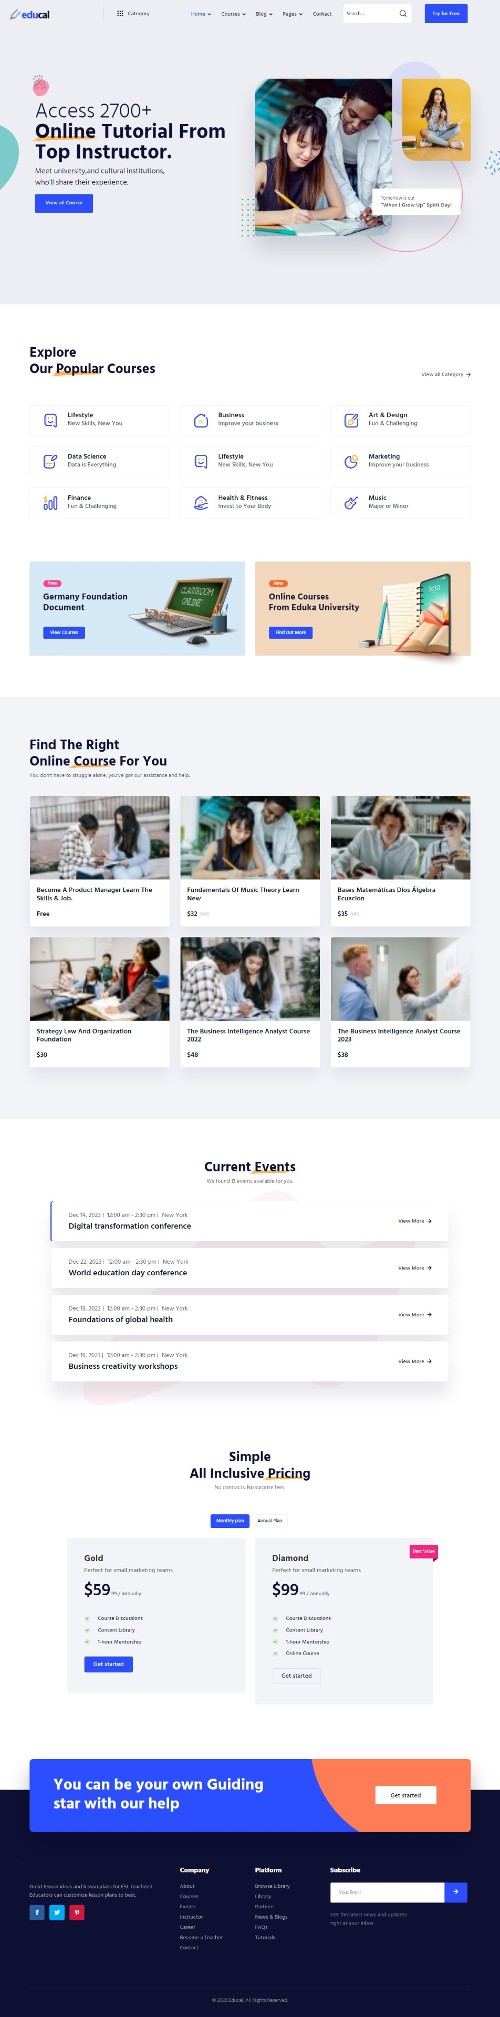 Educal – Online Courses and Education Joomla Template